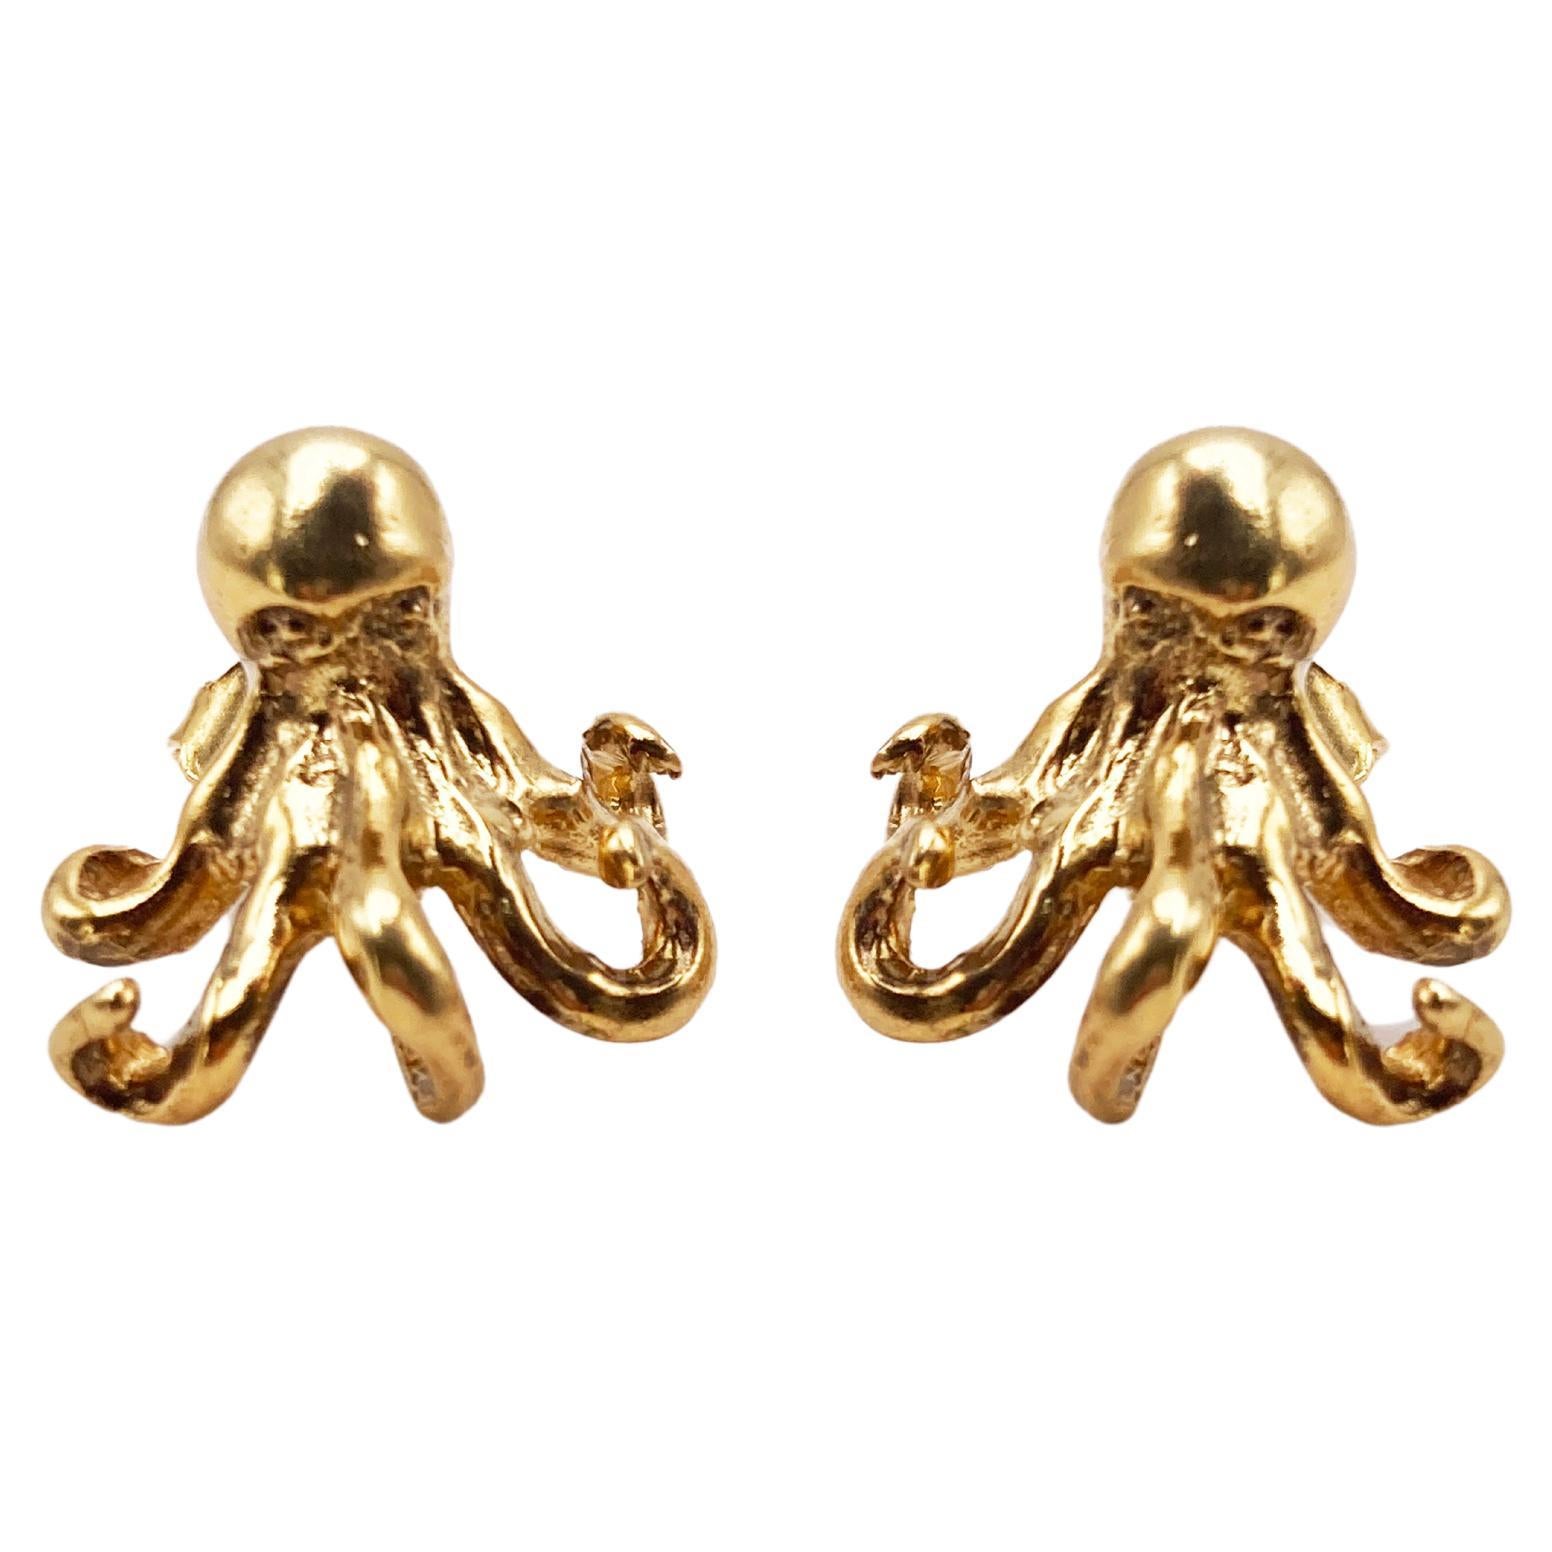 Rossella Ugolini 18K Yellow Gold Handcrafted Octopus Stud Earrings For Sale